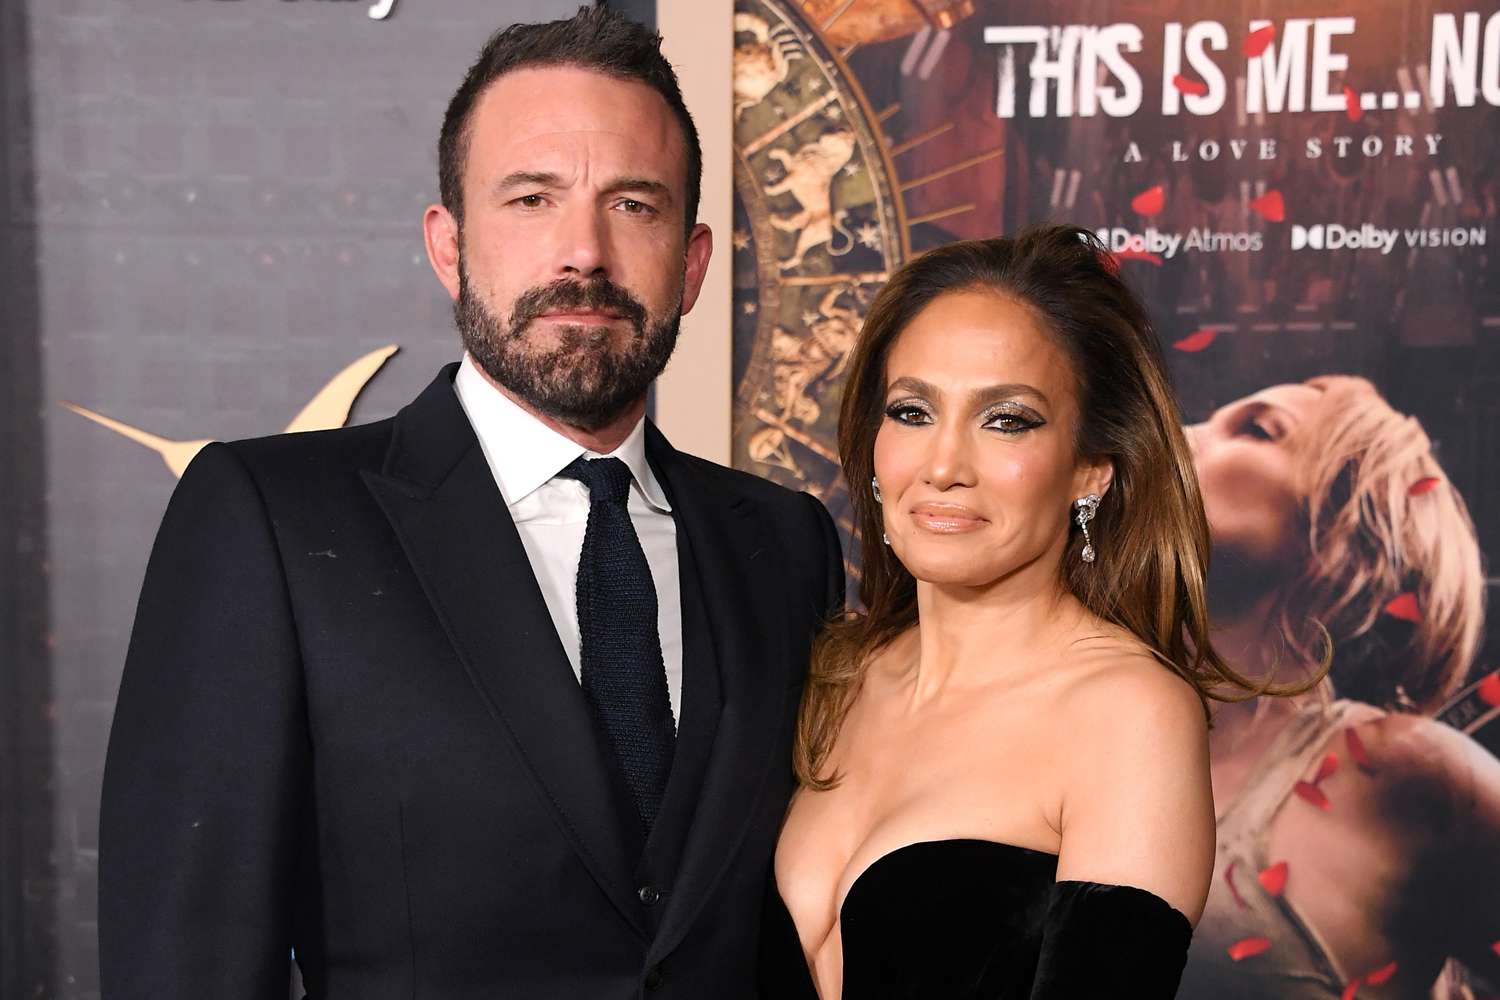 Jennifer Lopez and Ben Affleck 'Want to Put the Kids First' During 'Heartbreaking' Marriage Strain: Source